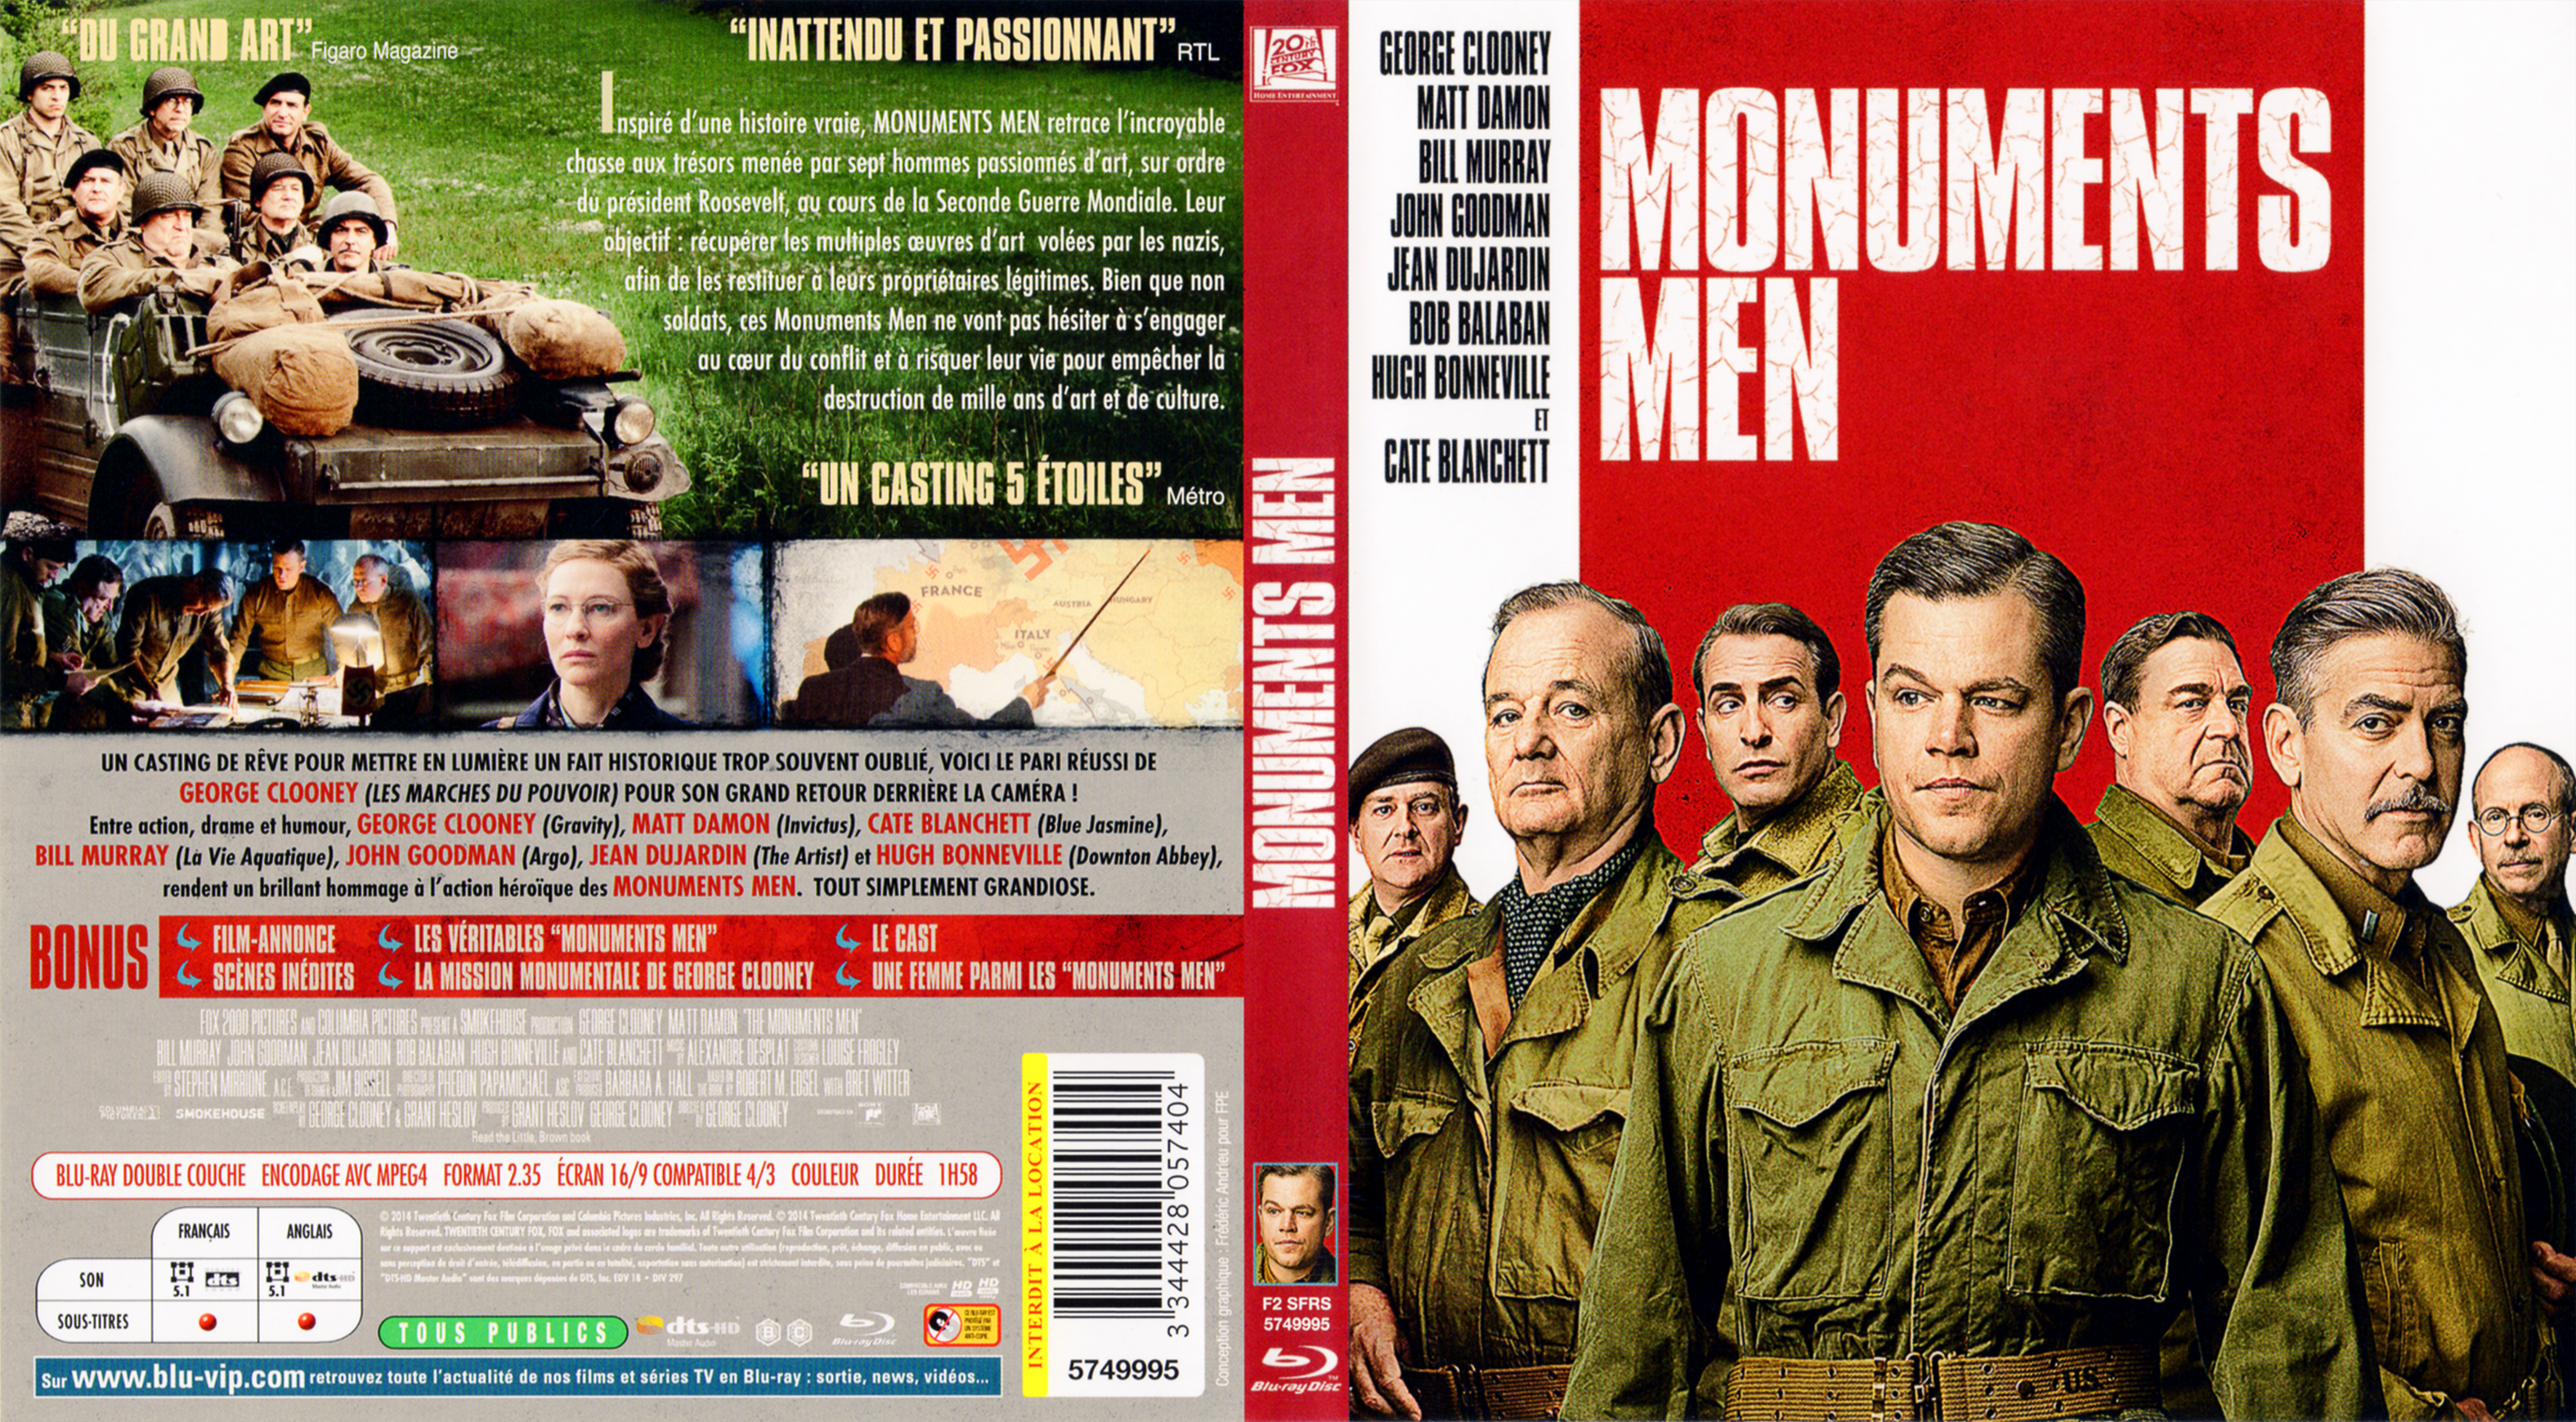 Jaquette DVD Monuments men (BLU-RAY)